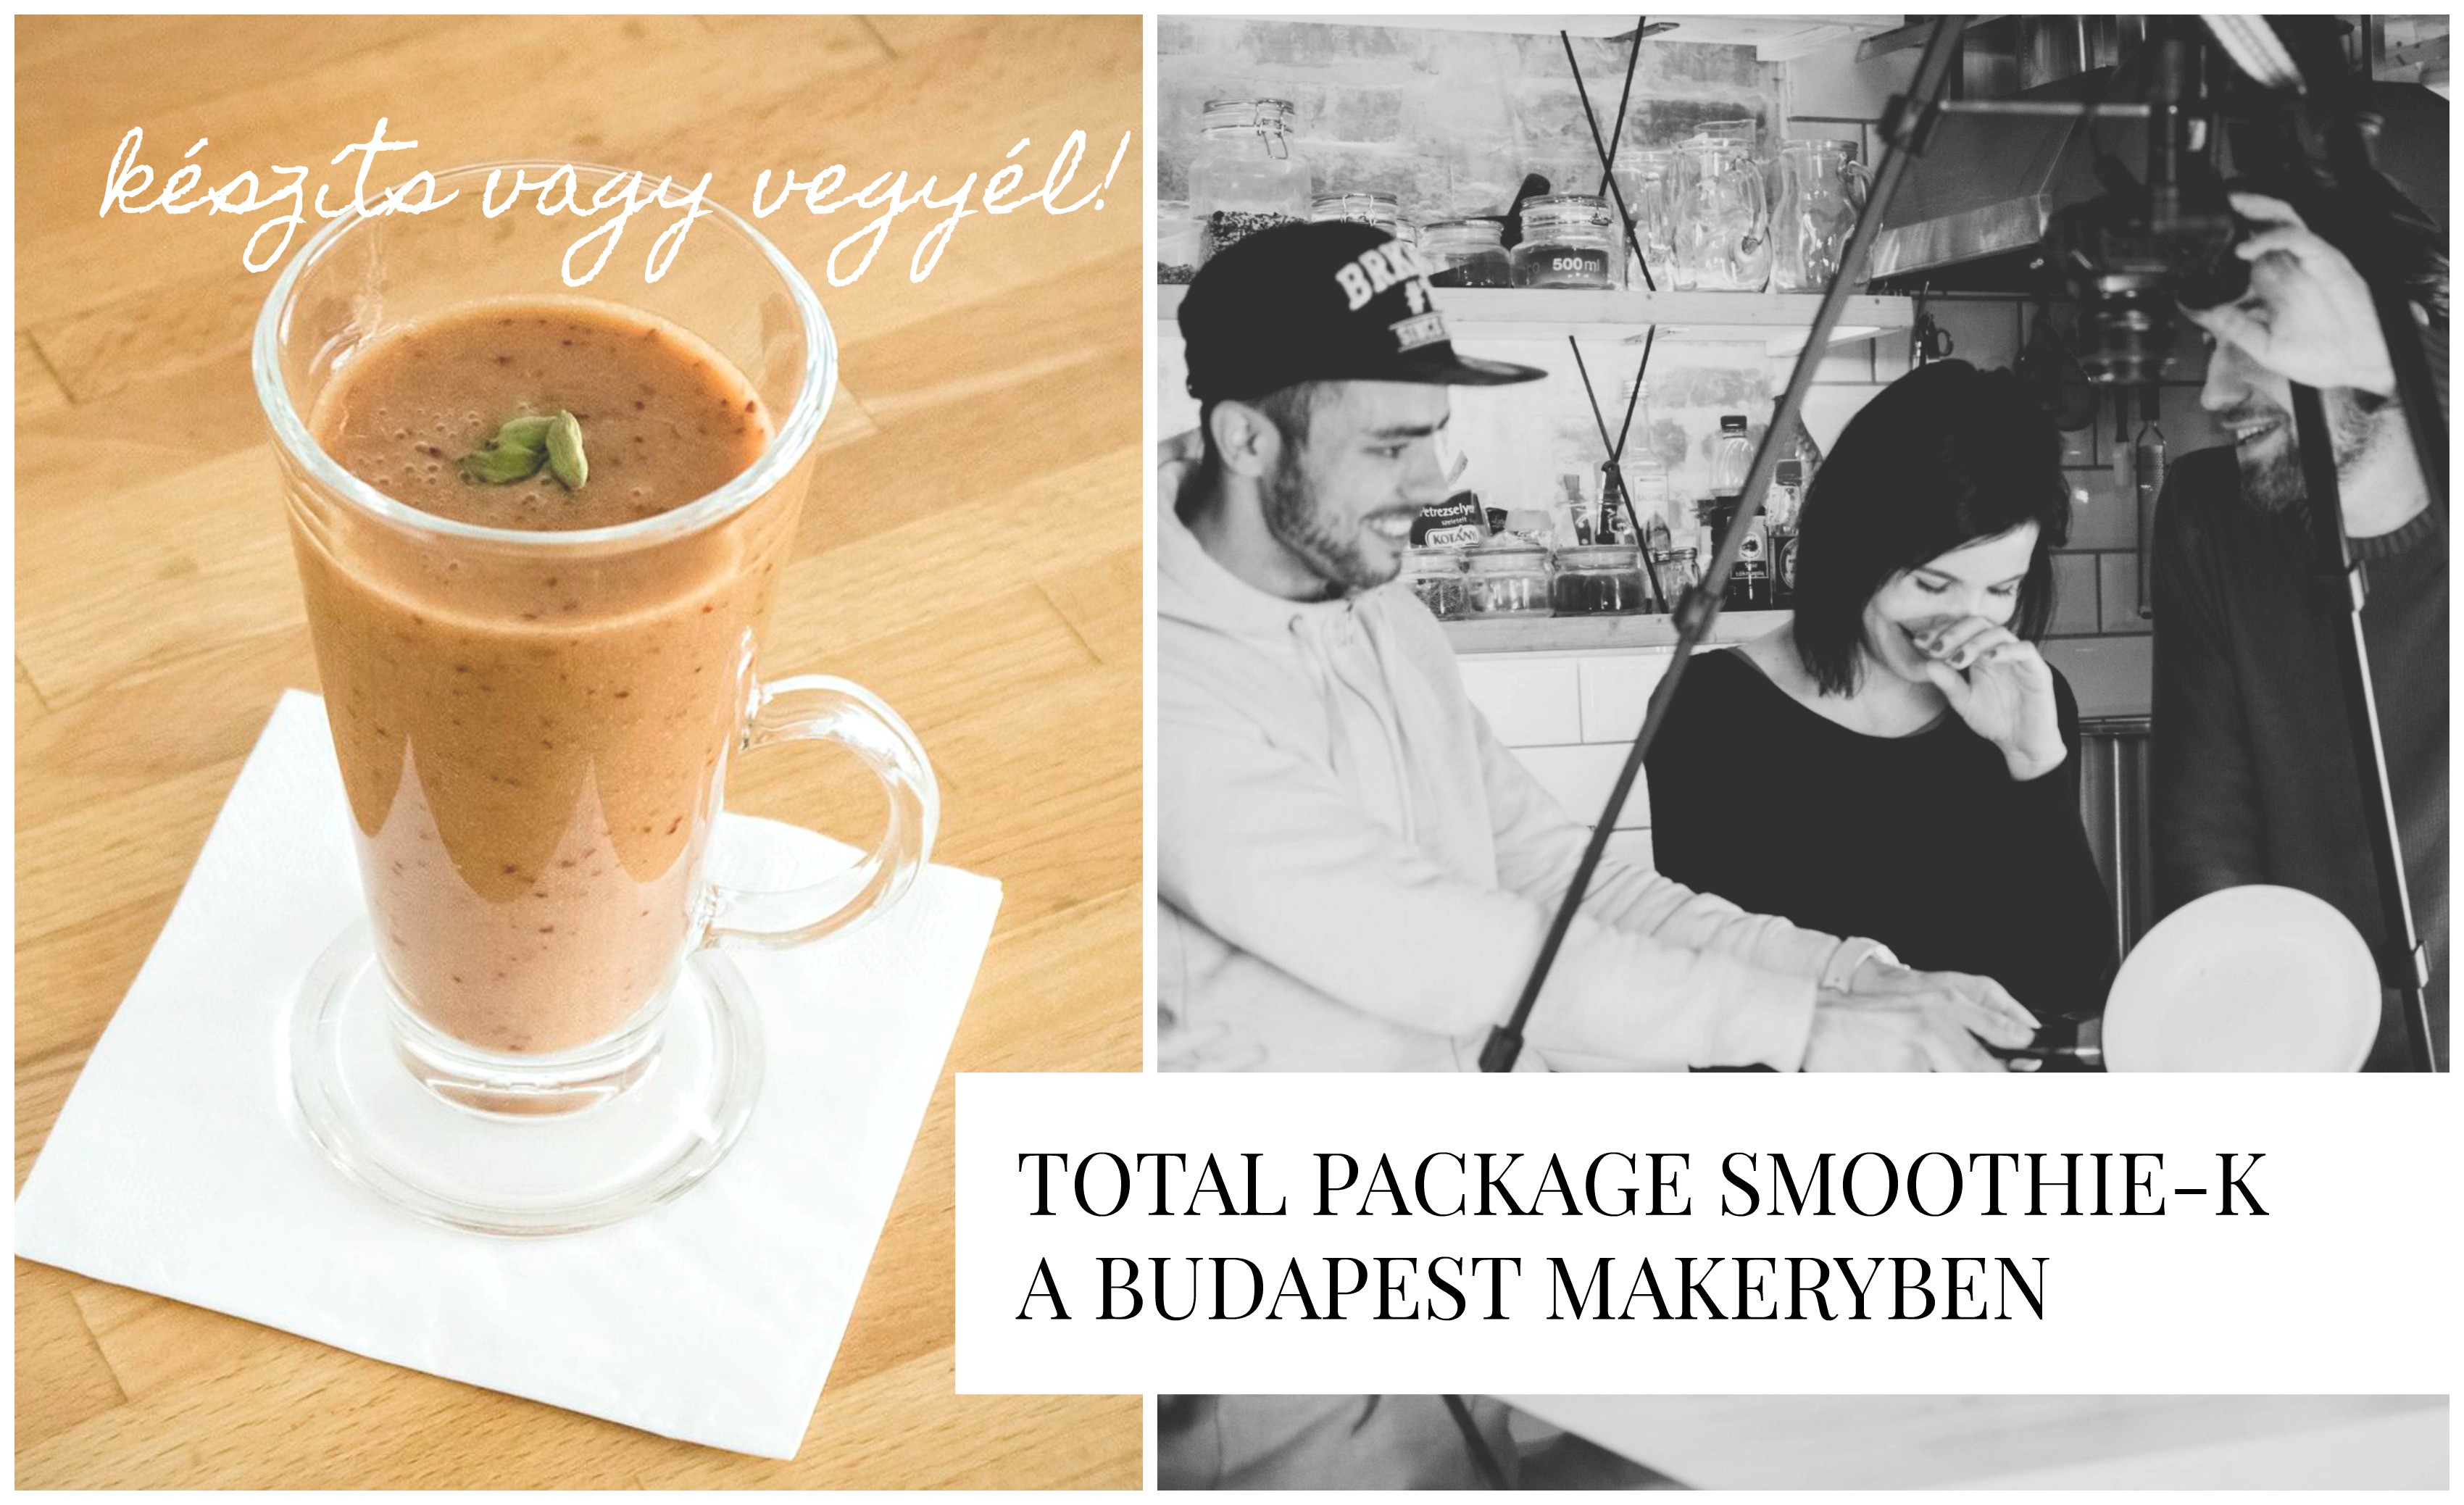 TOTAL PACKAGE SMOOTHIE-K A BUDAPEST MAKERYBEN